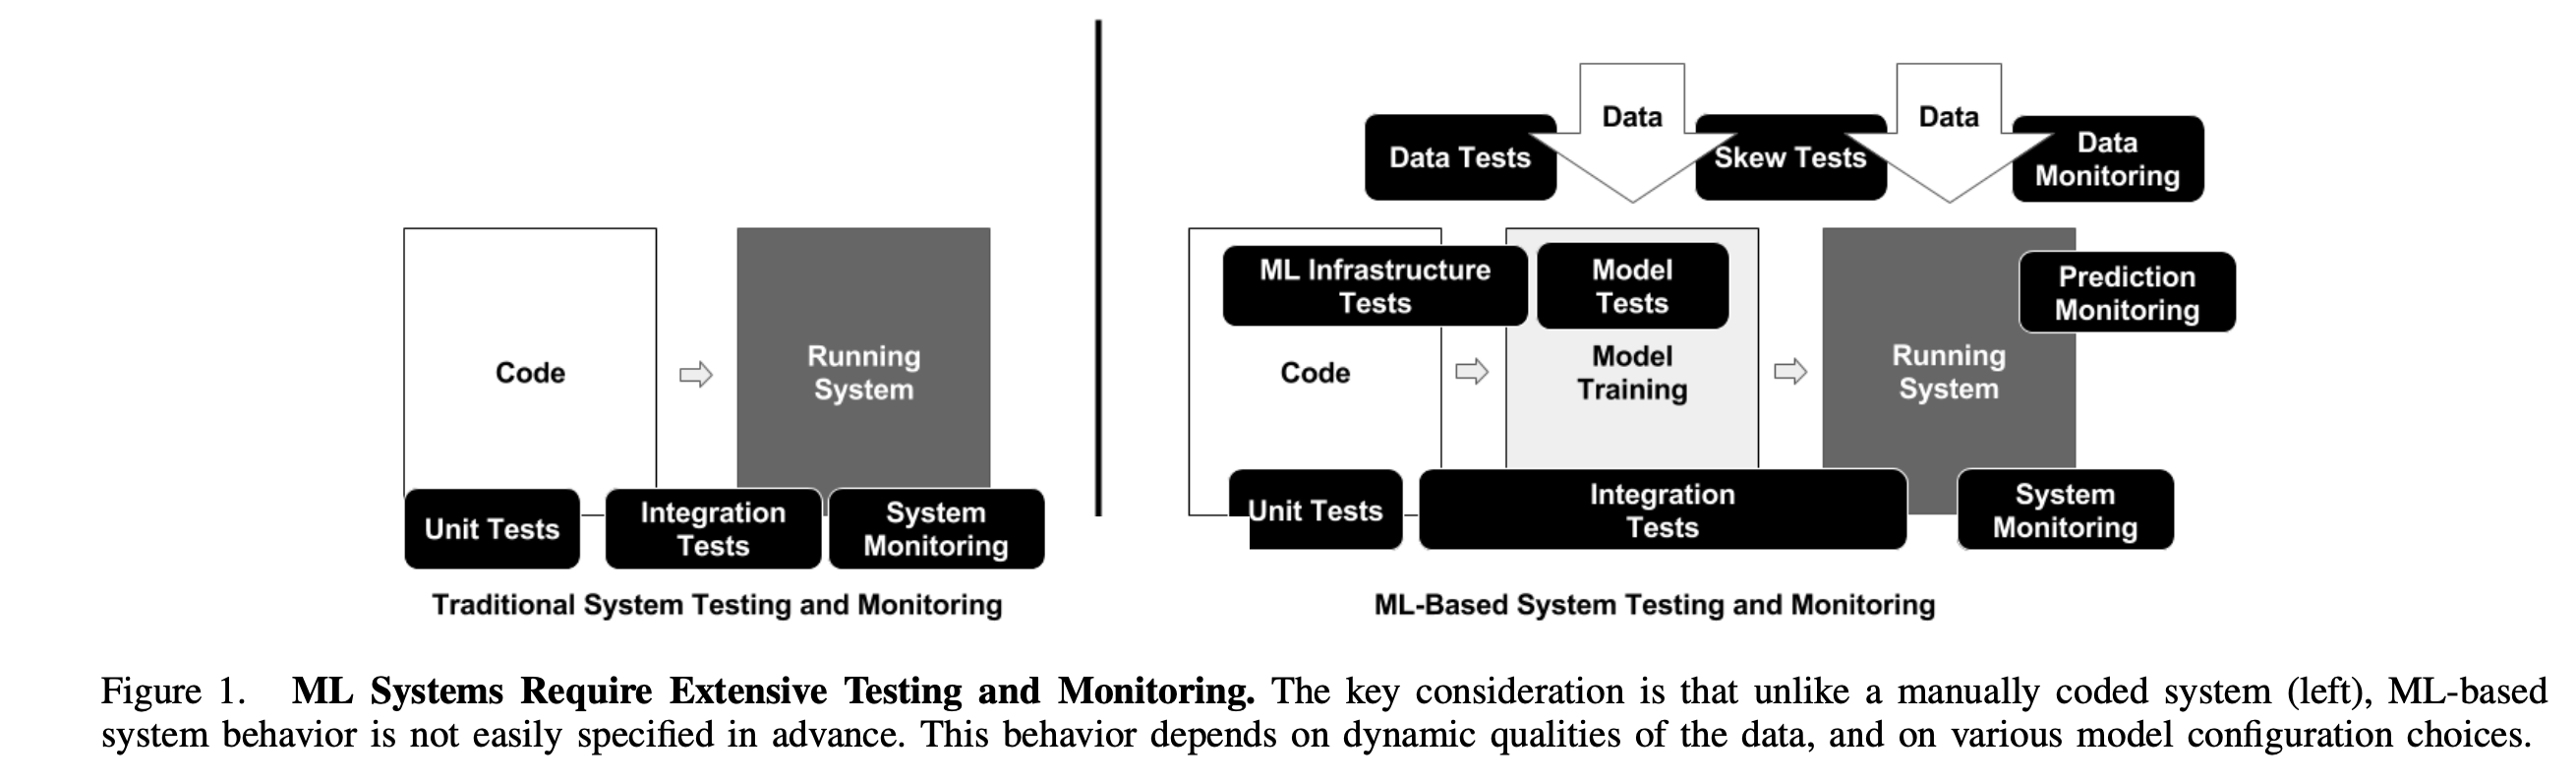 Testing in ML Systems